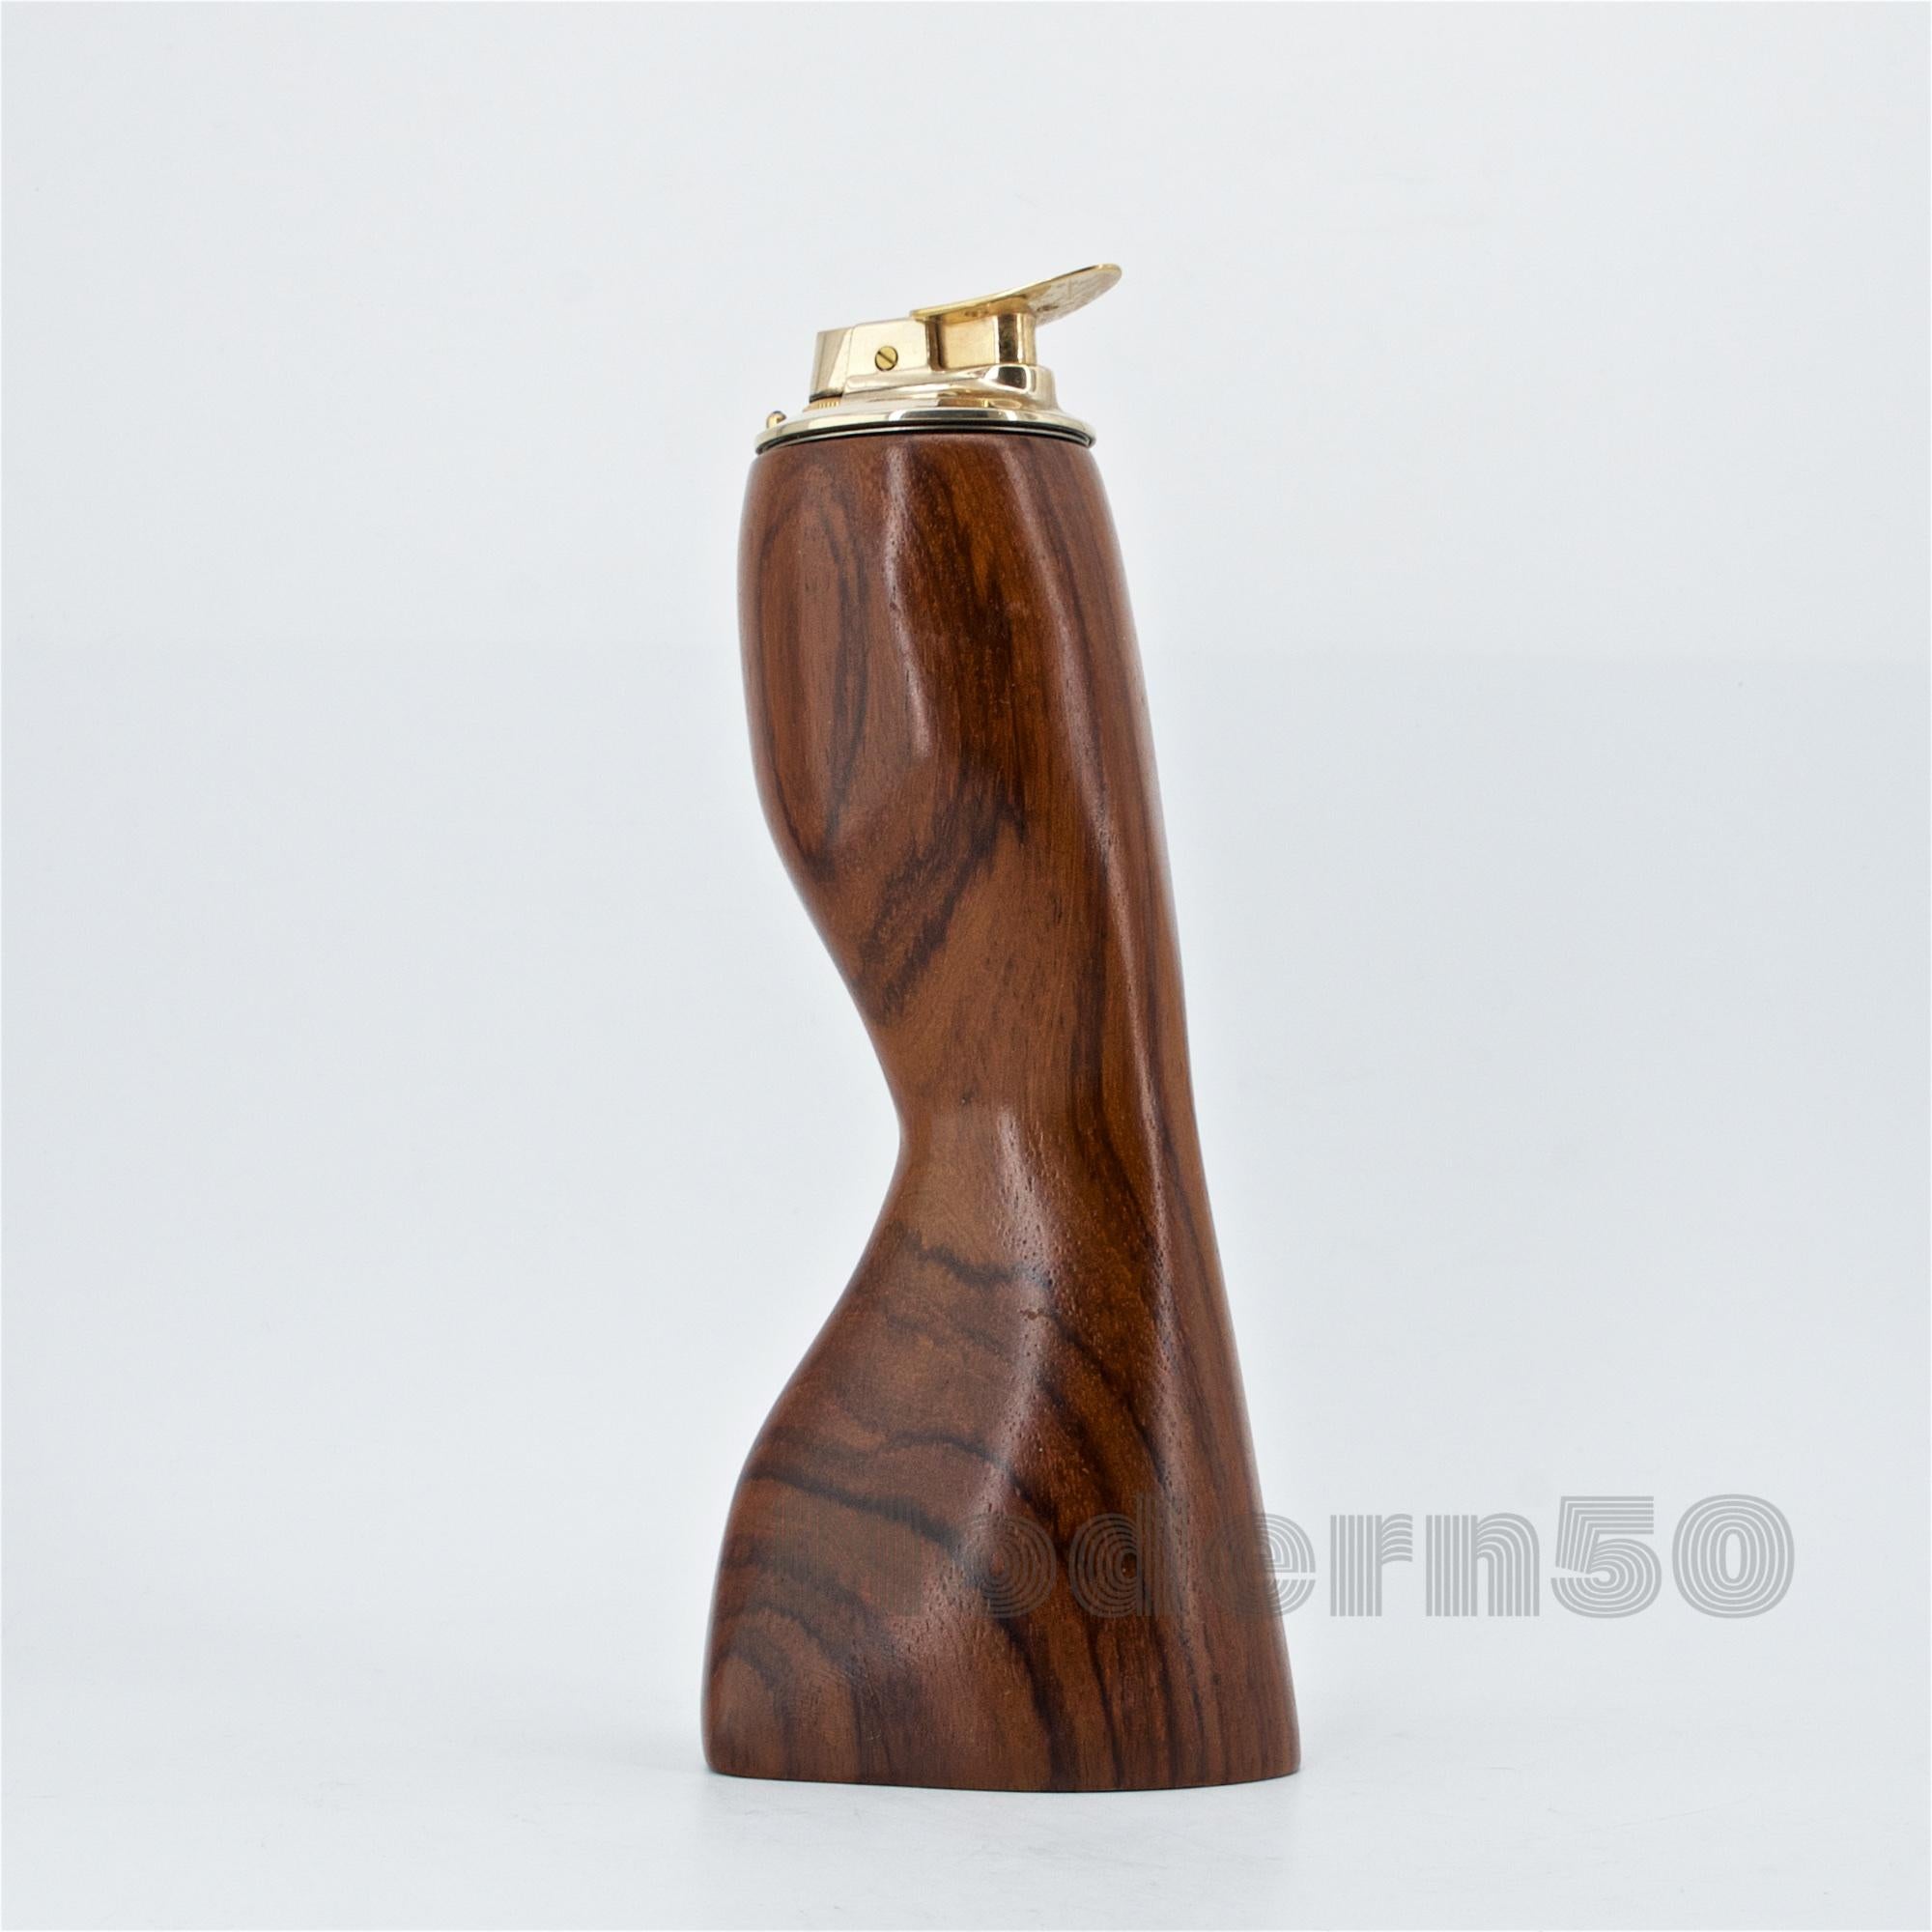 Wonderful and rare large table lighter by Emil Milan in E.T. rosewood.  Lighter is not functioning, will need flint and fuel.